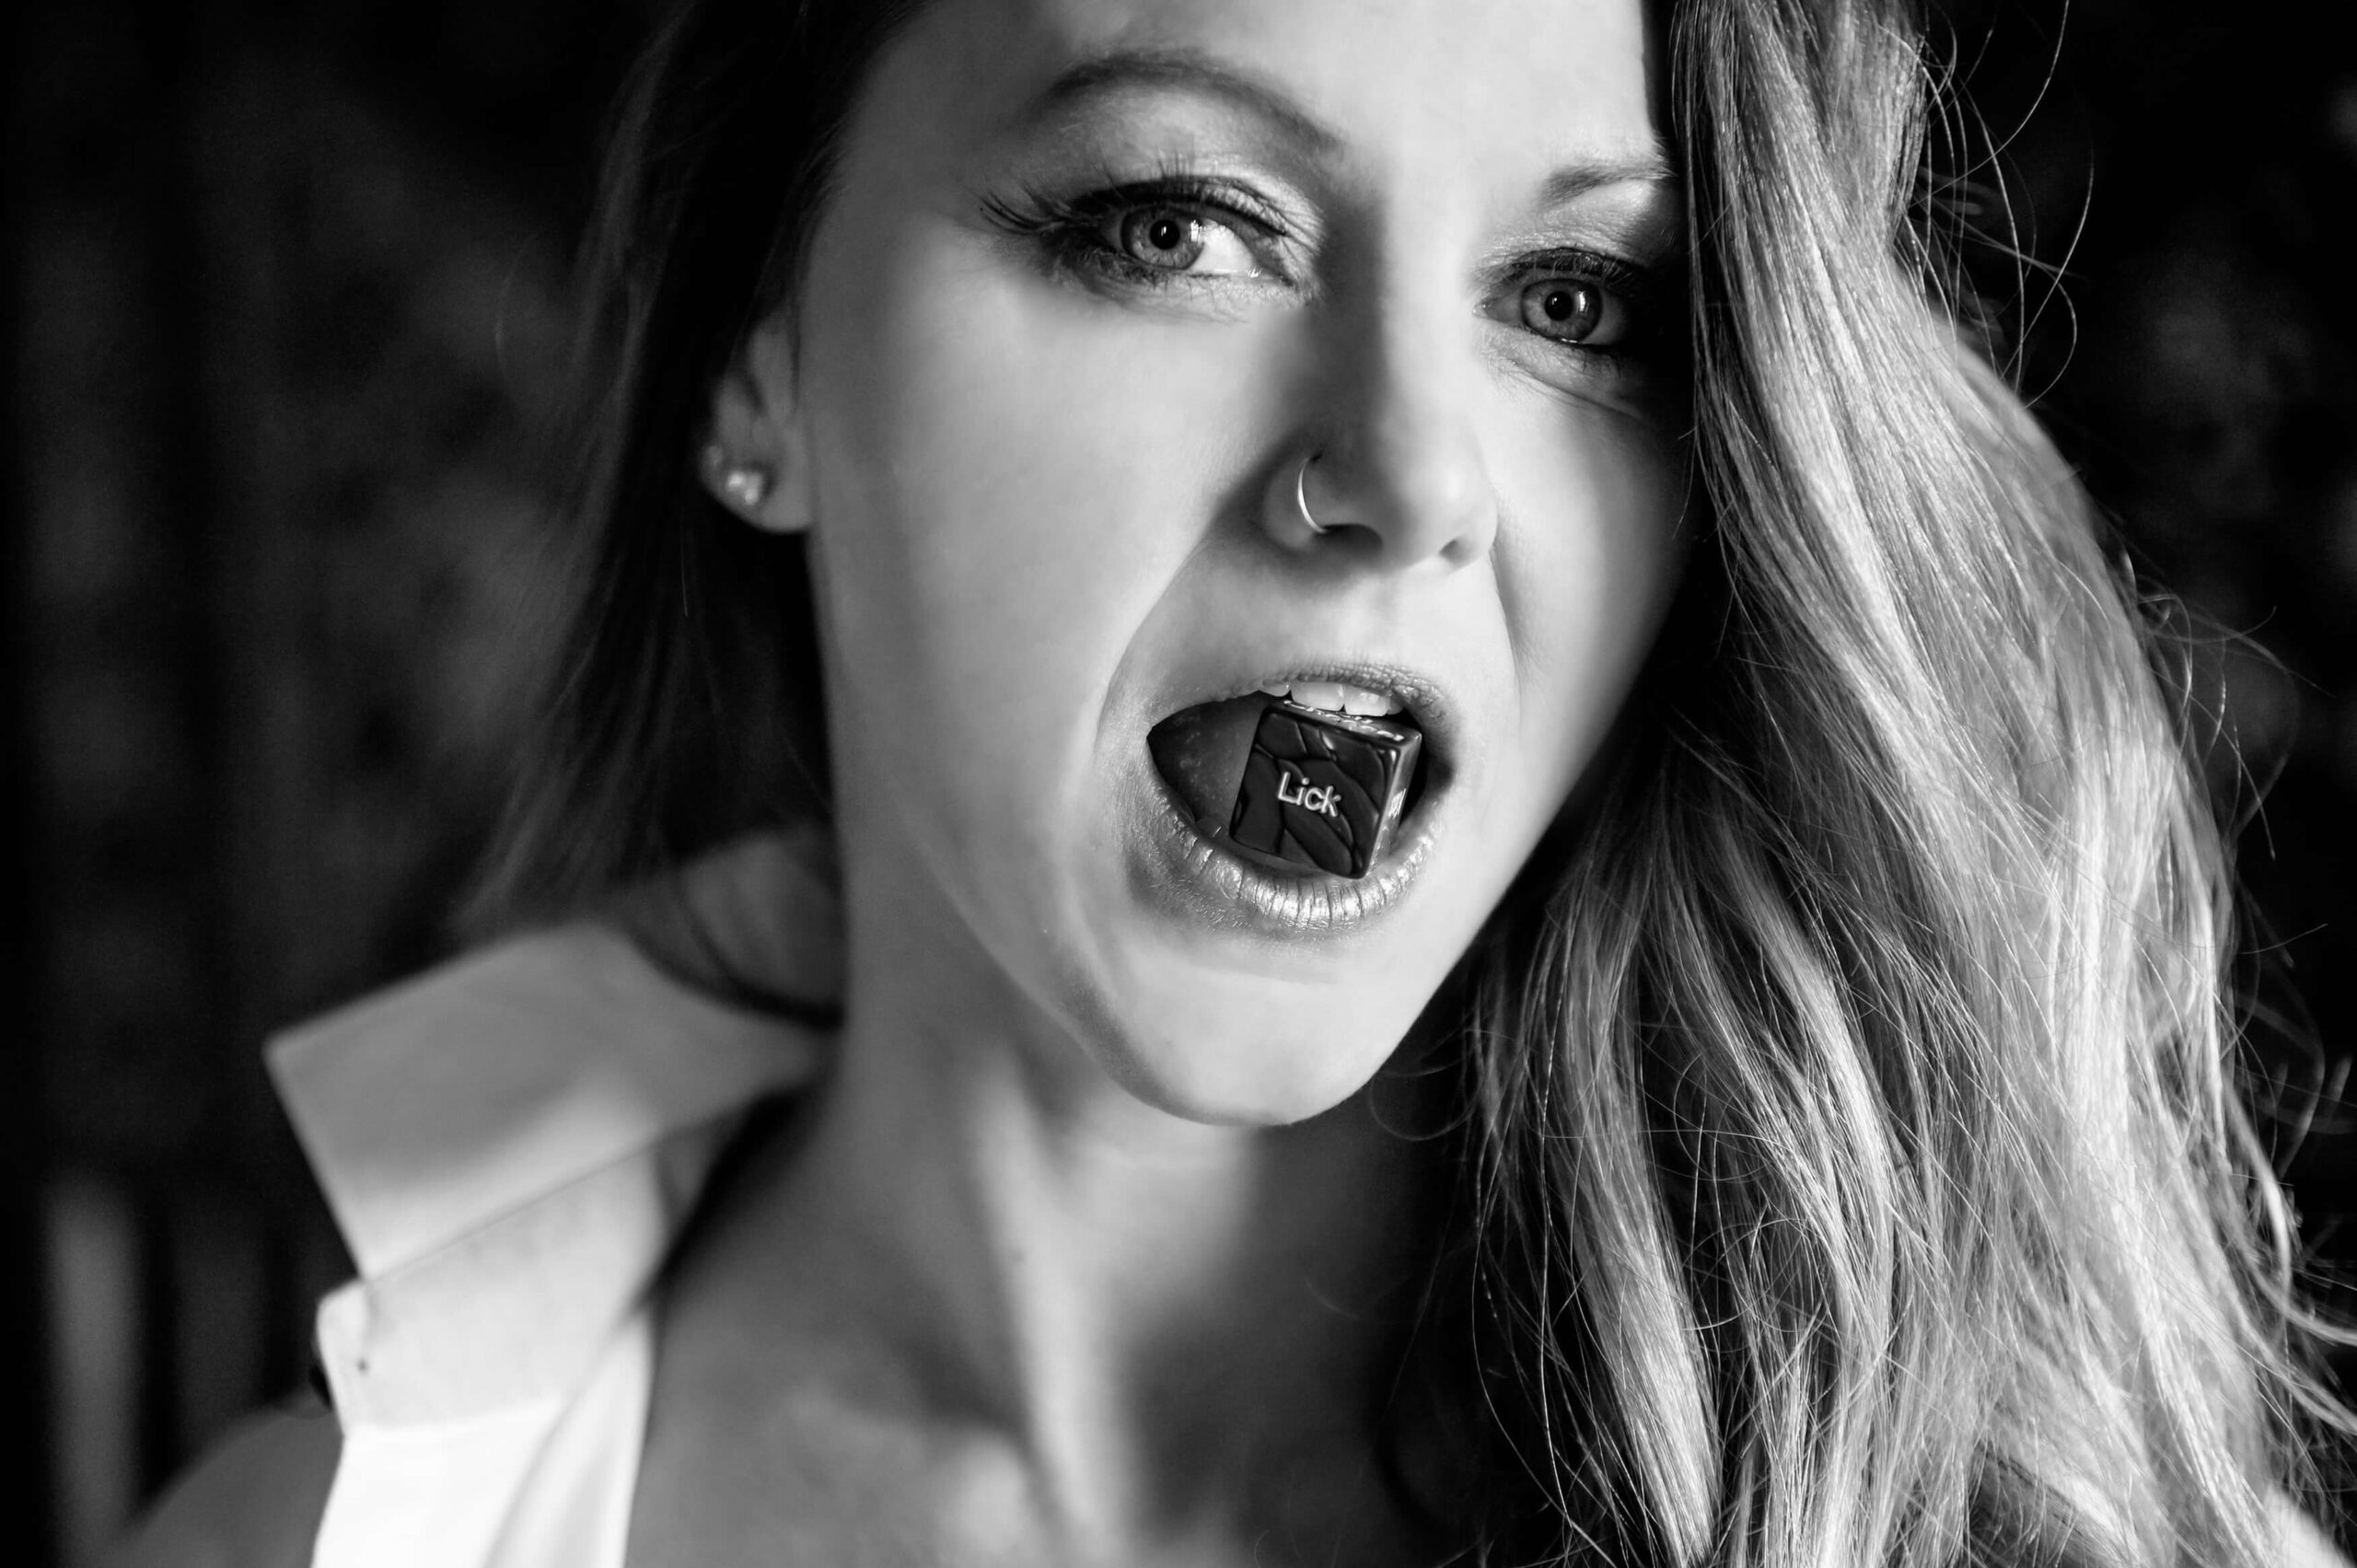 Black and white photo of a woman with a dice in her mouth for her Hamilton Boudoir photography session.